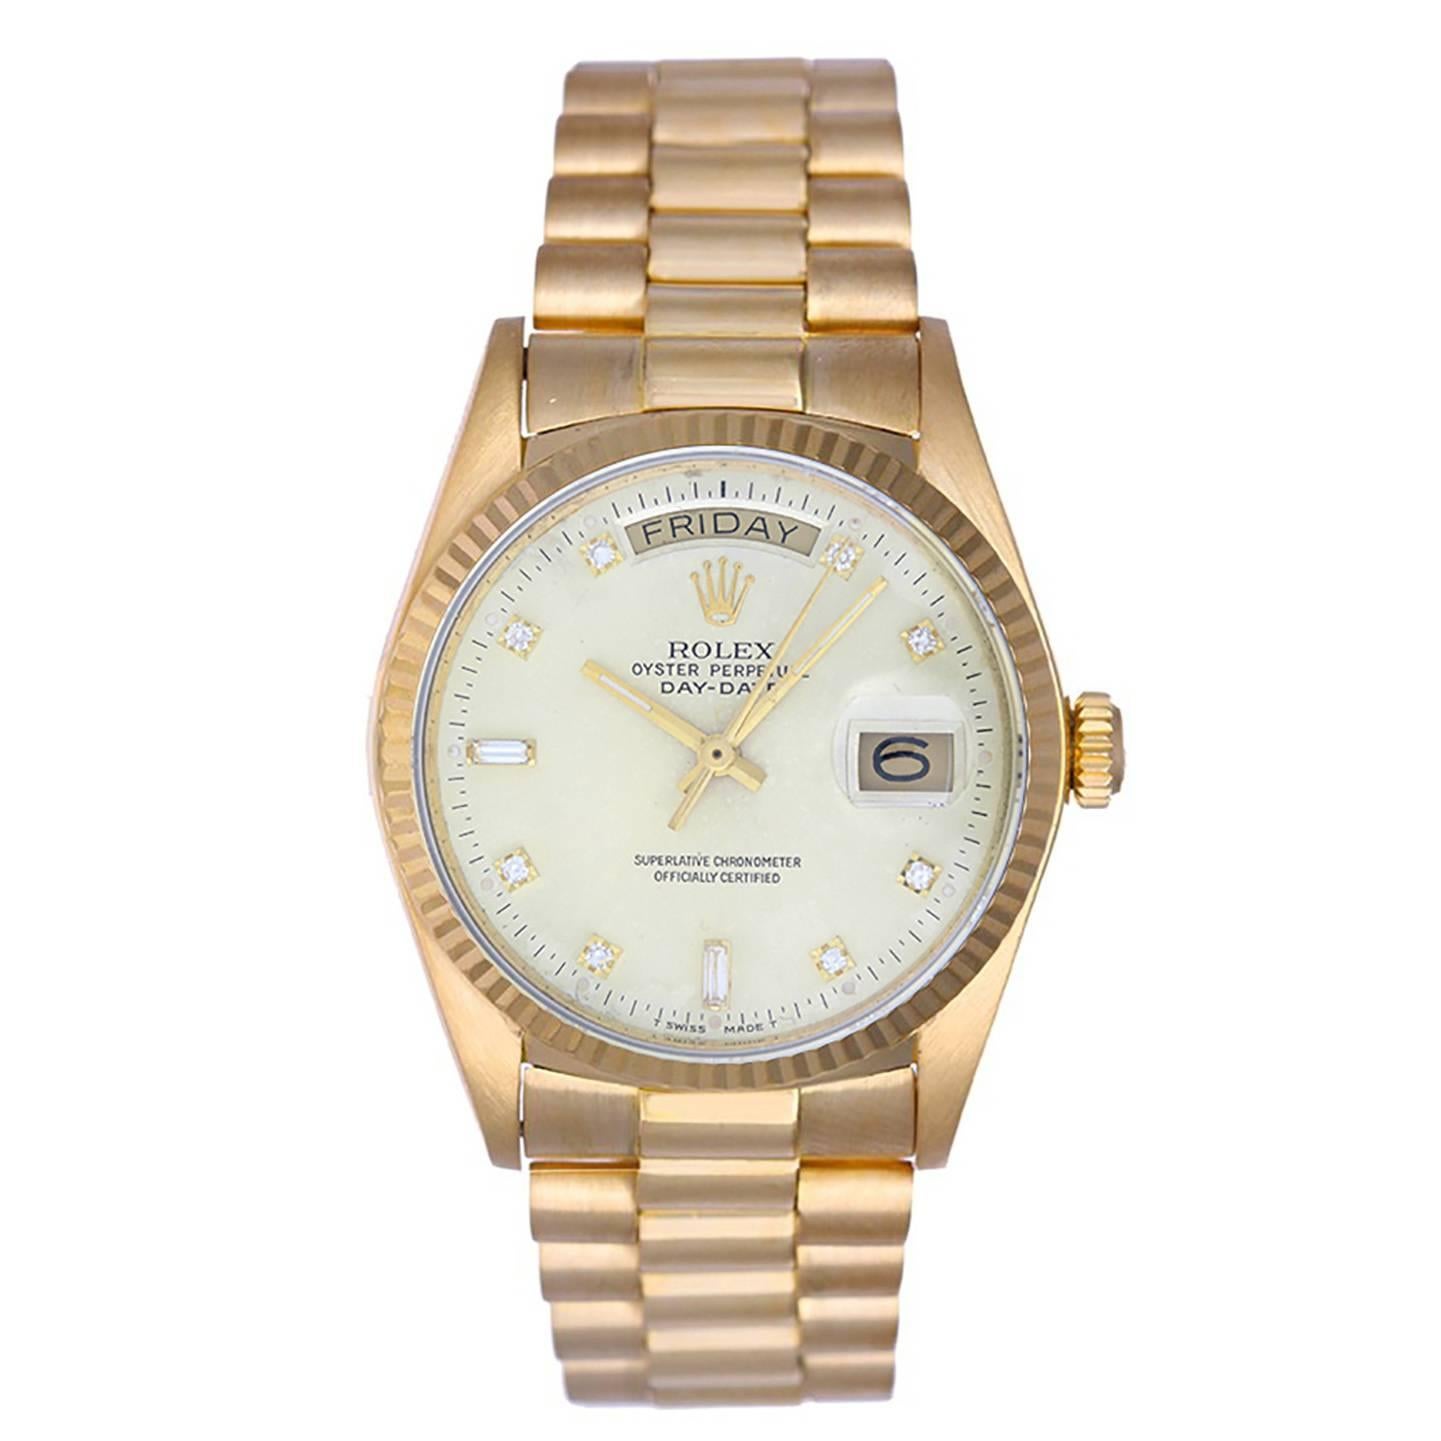 Rolex ladies Yellow Gold President Day-Date Automatic Wristwatch Ref 18038